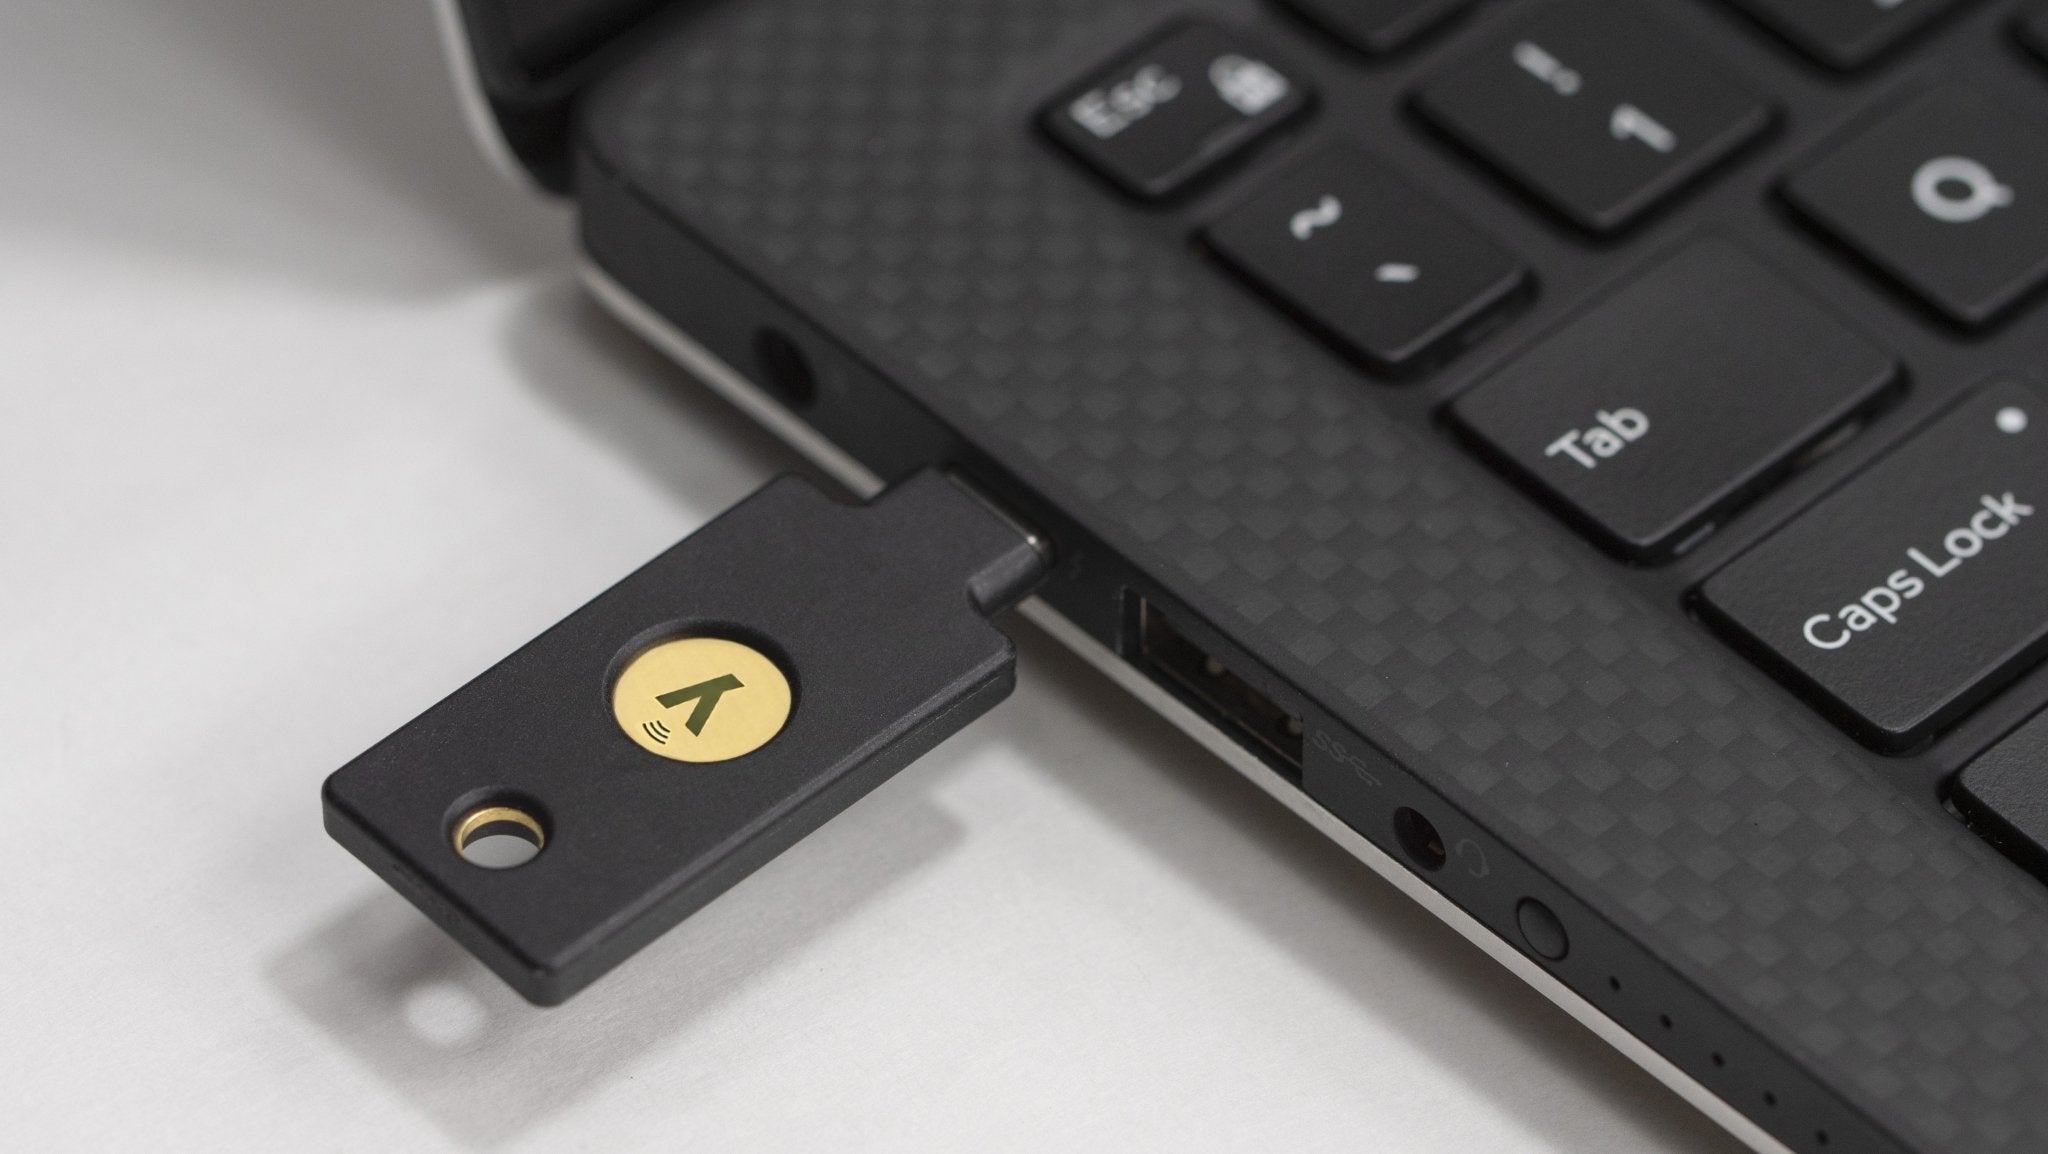 Yubico Security Key C NFC Review